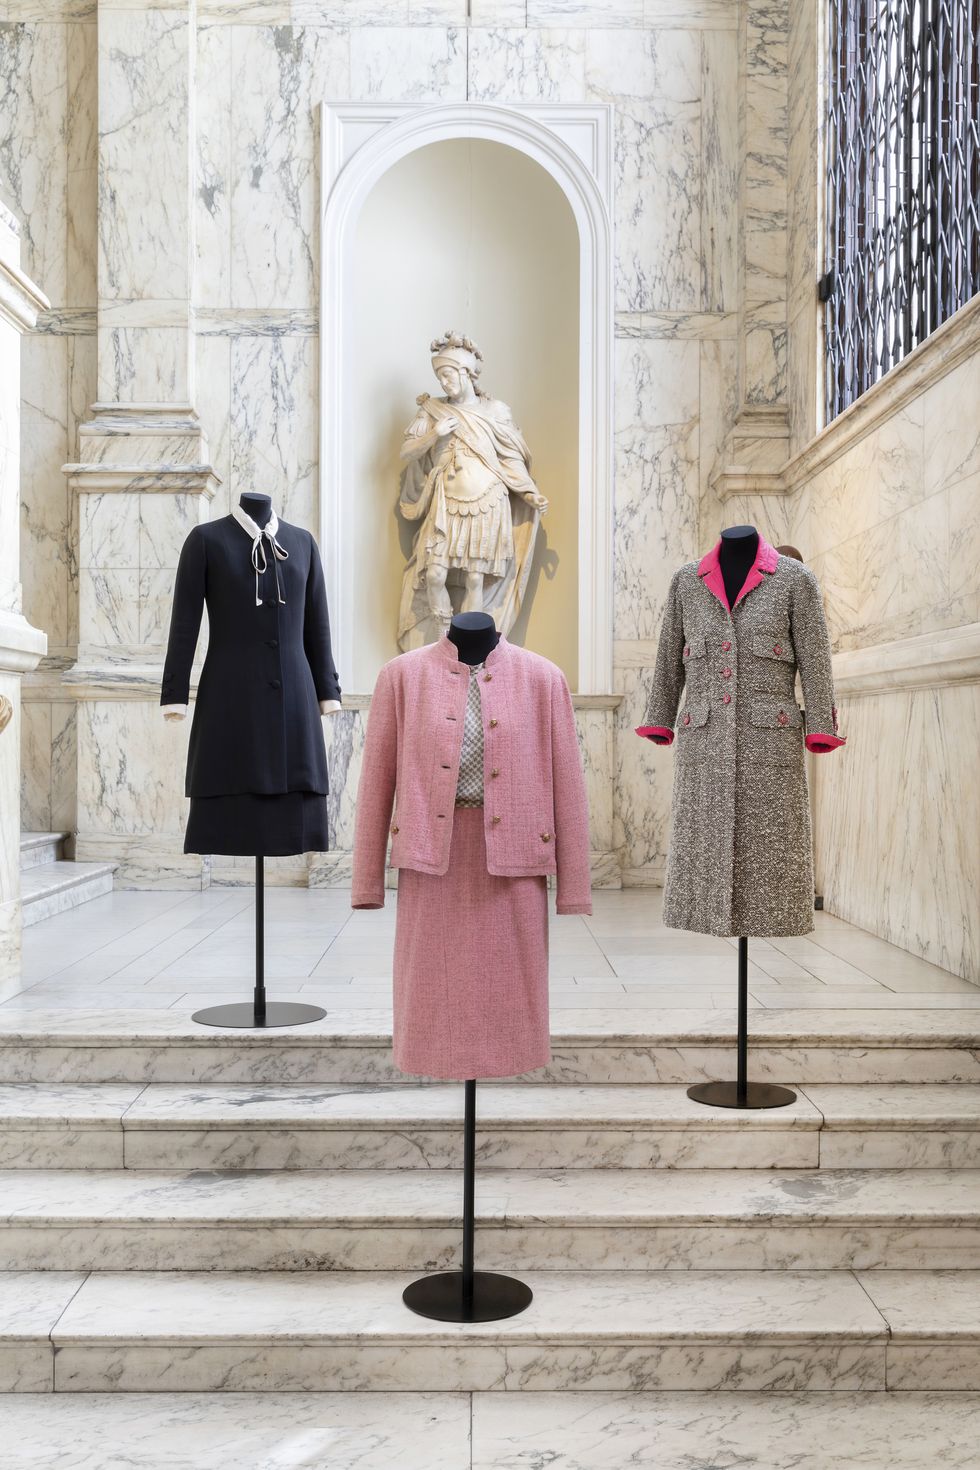 All the facts about the V&A's tremendous Coco Chanel exhibition